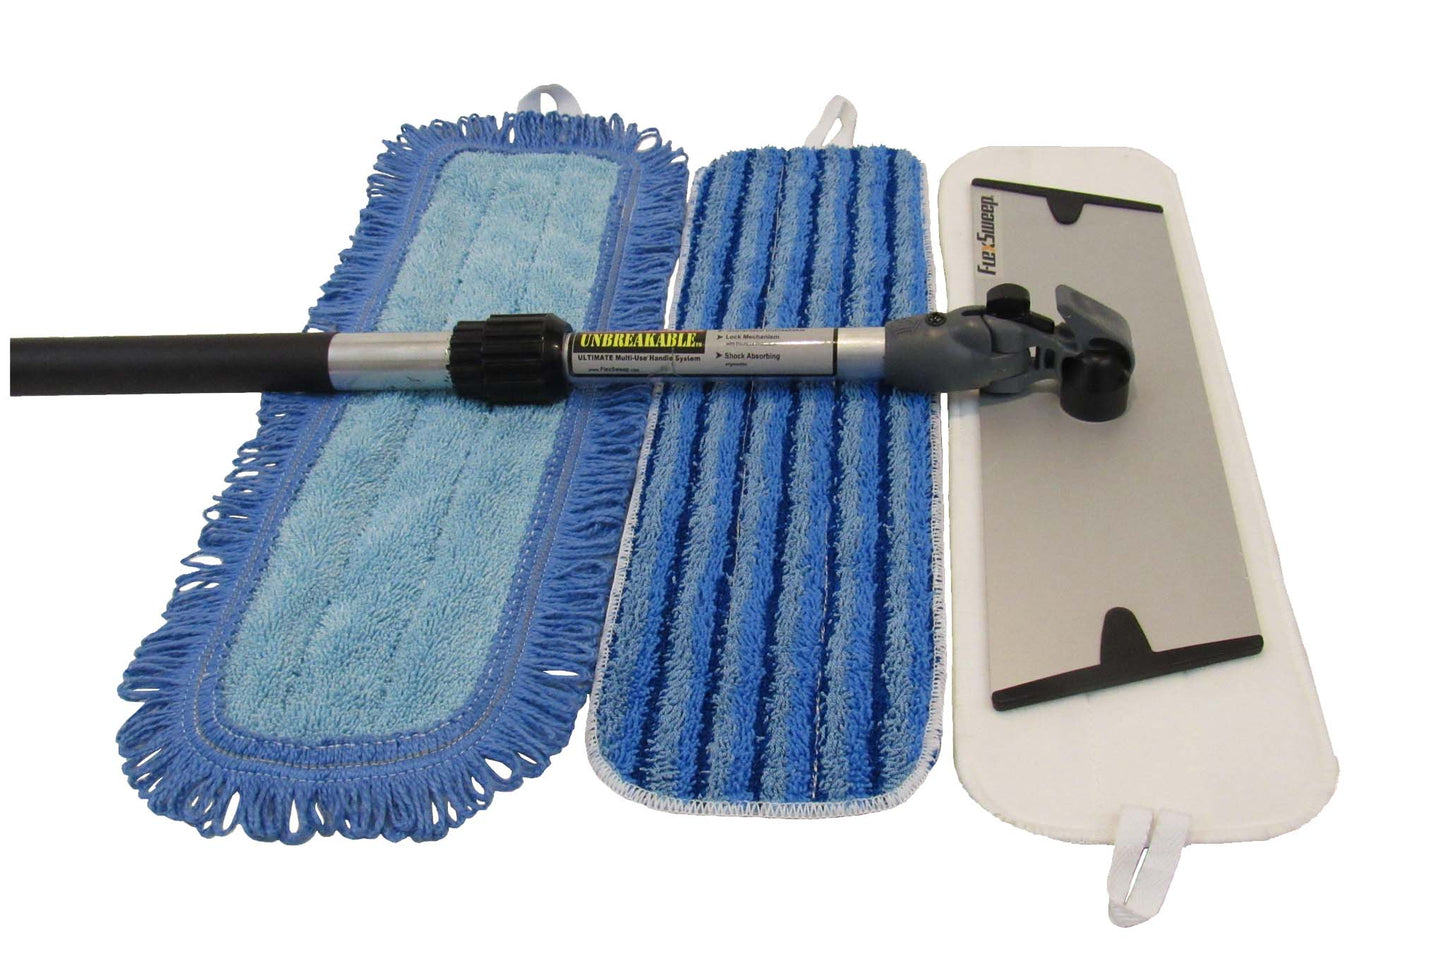 Easy-Clean™ Snap-On™ 18" Flat Mop Set with Aero-Aluminum Adjustable Handle (4 Pack) - FlexSweep